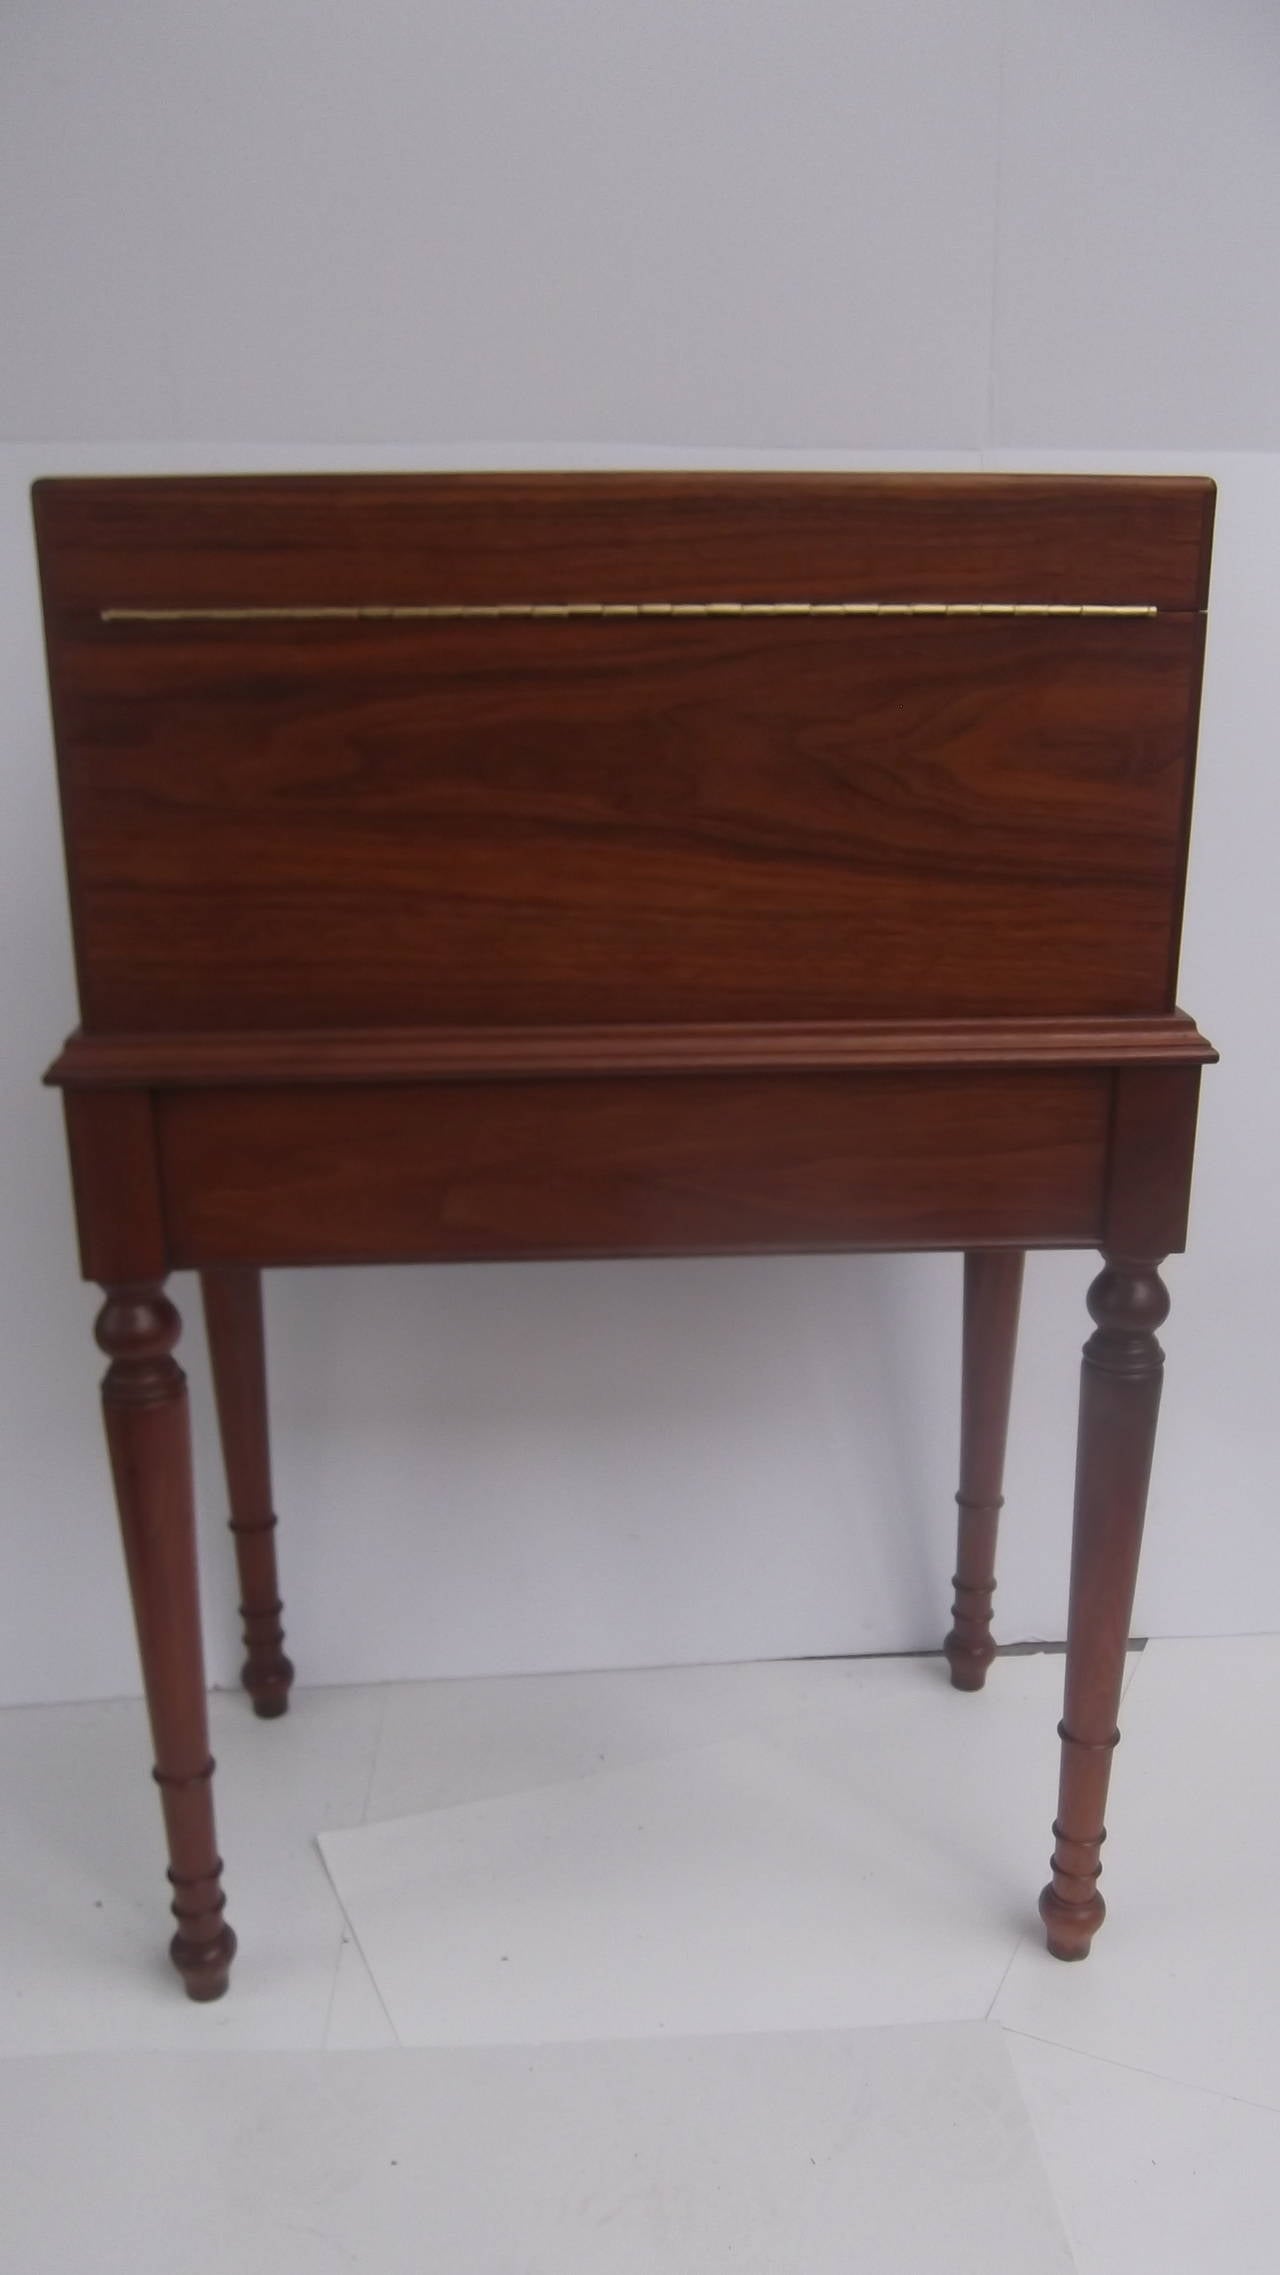 A handsome medium stained mahogany humidor from the 1930-1940's.  Designed as a 19th century box on stand, this piece of accent furniture is a functional humidor. The humidor box is tin lined, has a plaque noting 